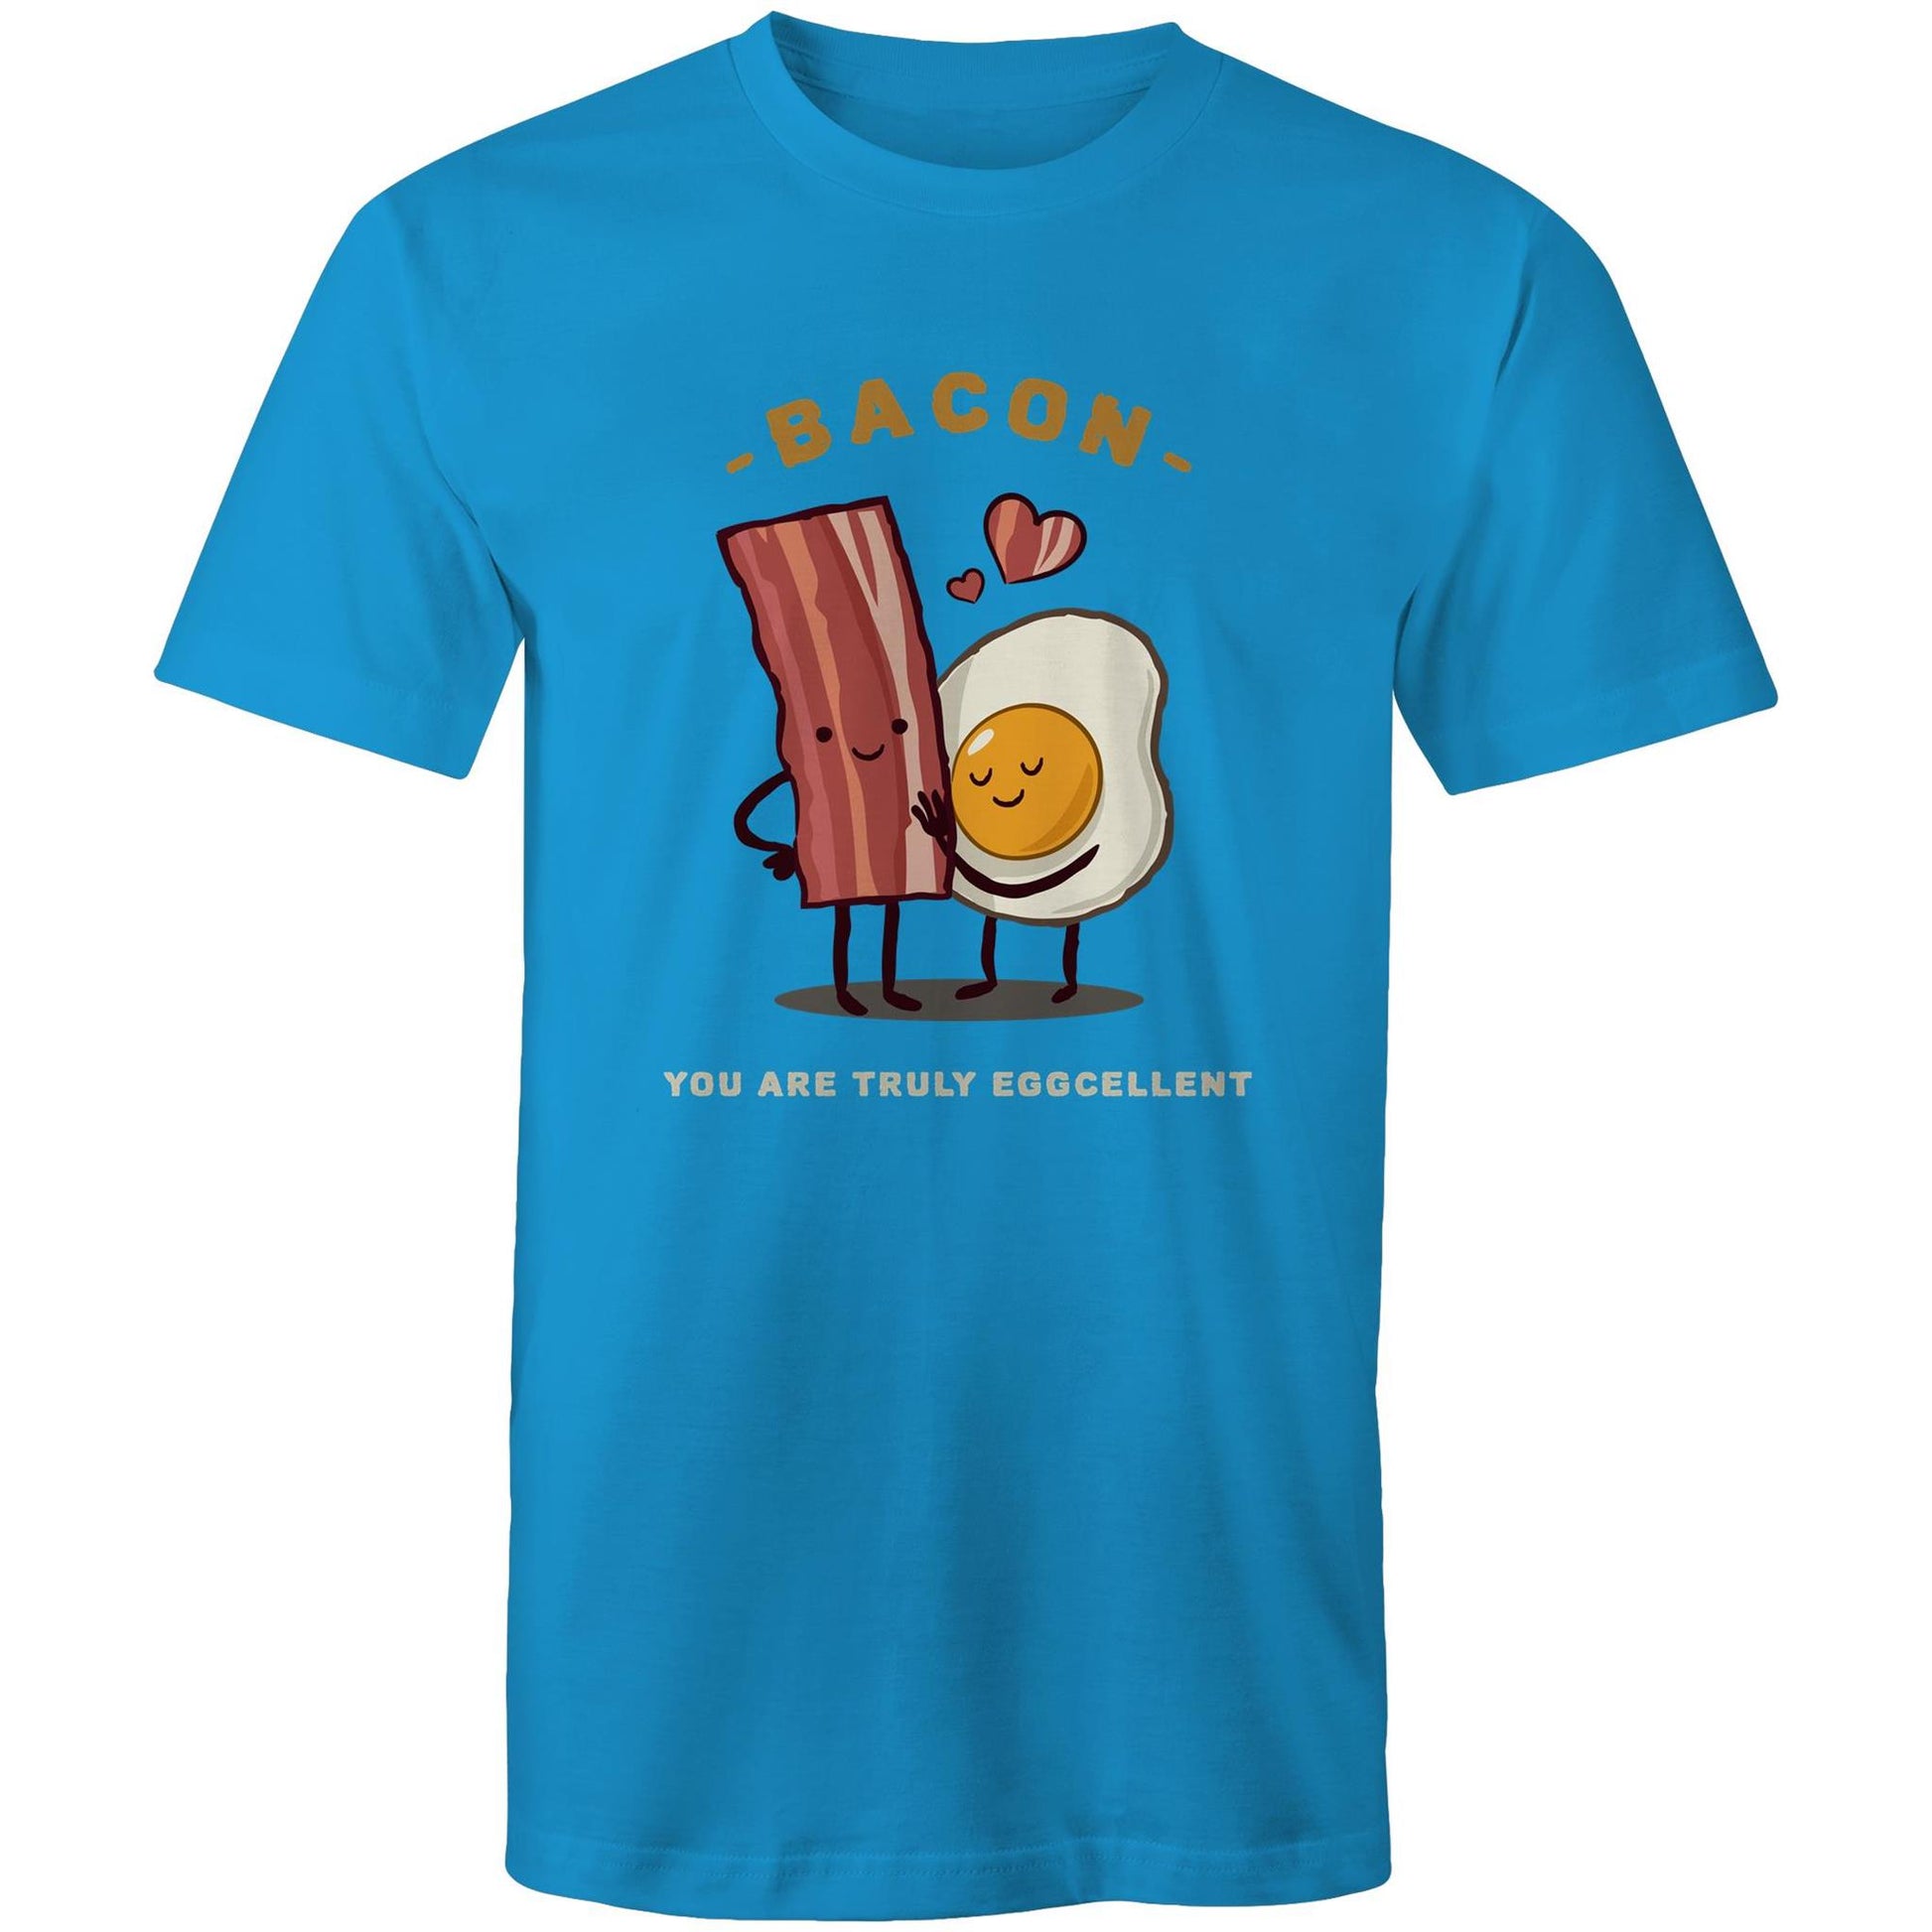 Bacon, You Are Truly Eggcellent - Mens T-Shirt Arctic Blue Mens T-shirt Food